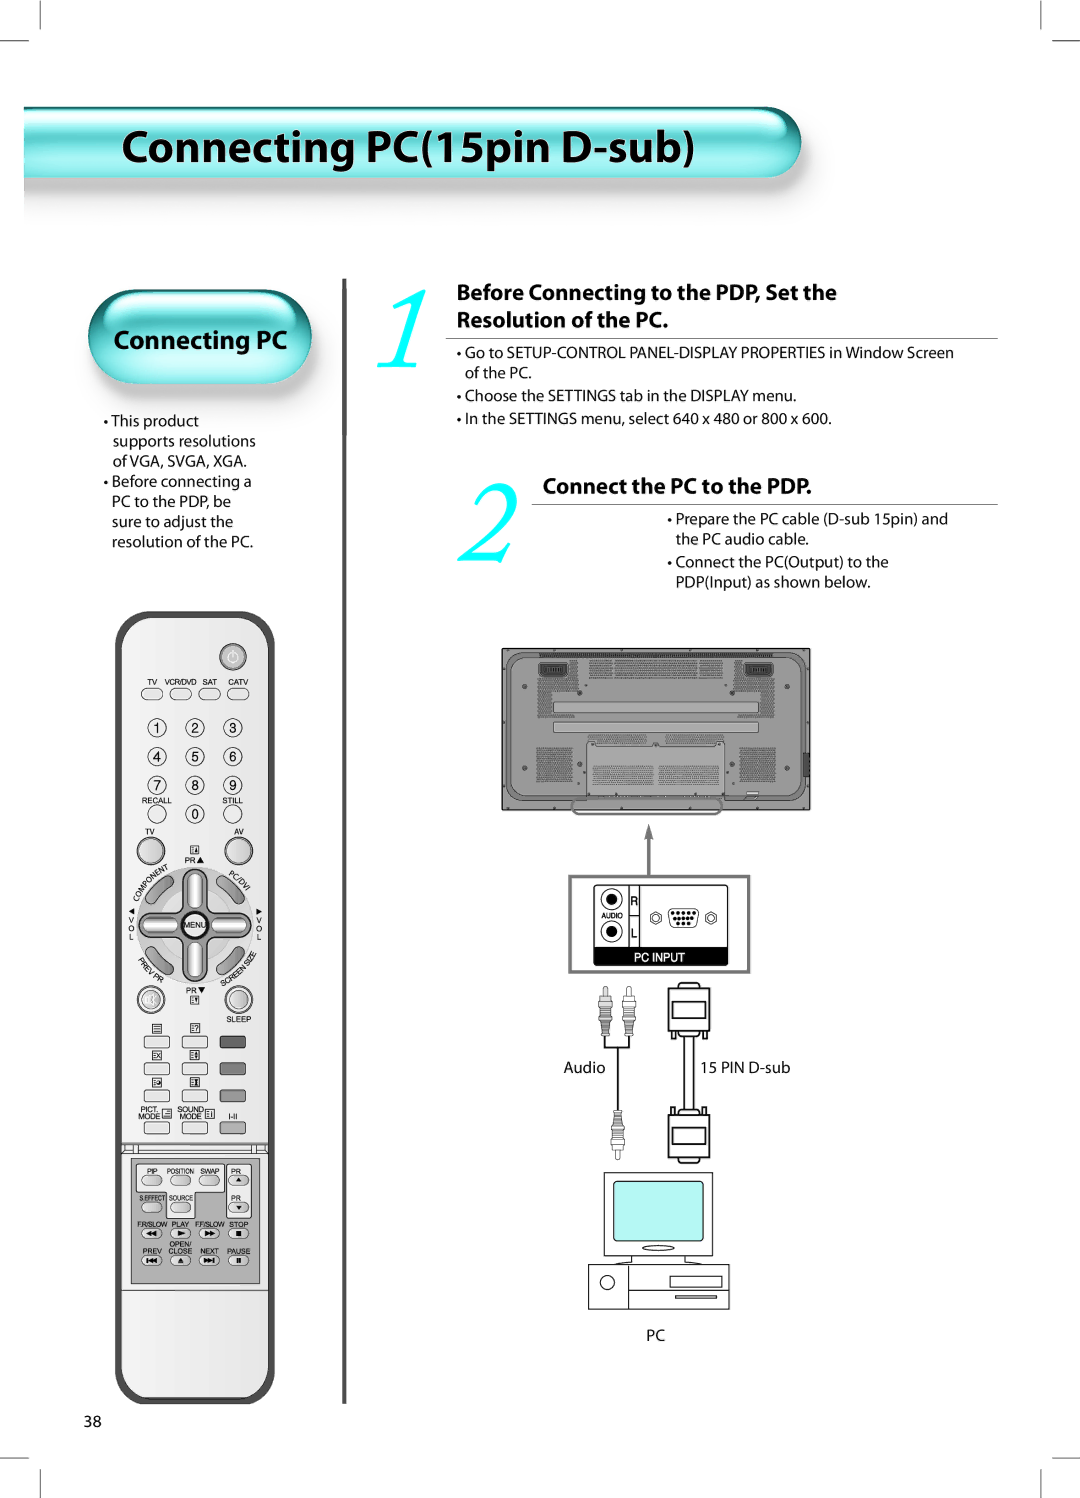 Daewoo DT-42A1 user manual Connecting PC15pin D-sub, Before Connecting to the PDP, Set, Resolution of the PC 